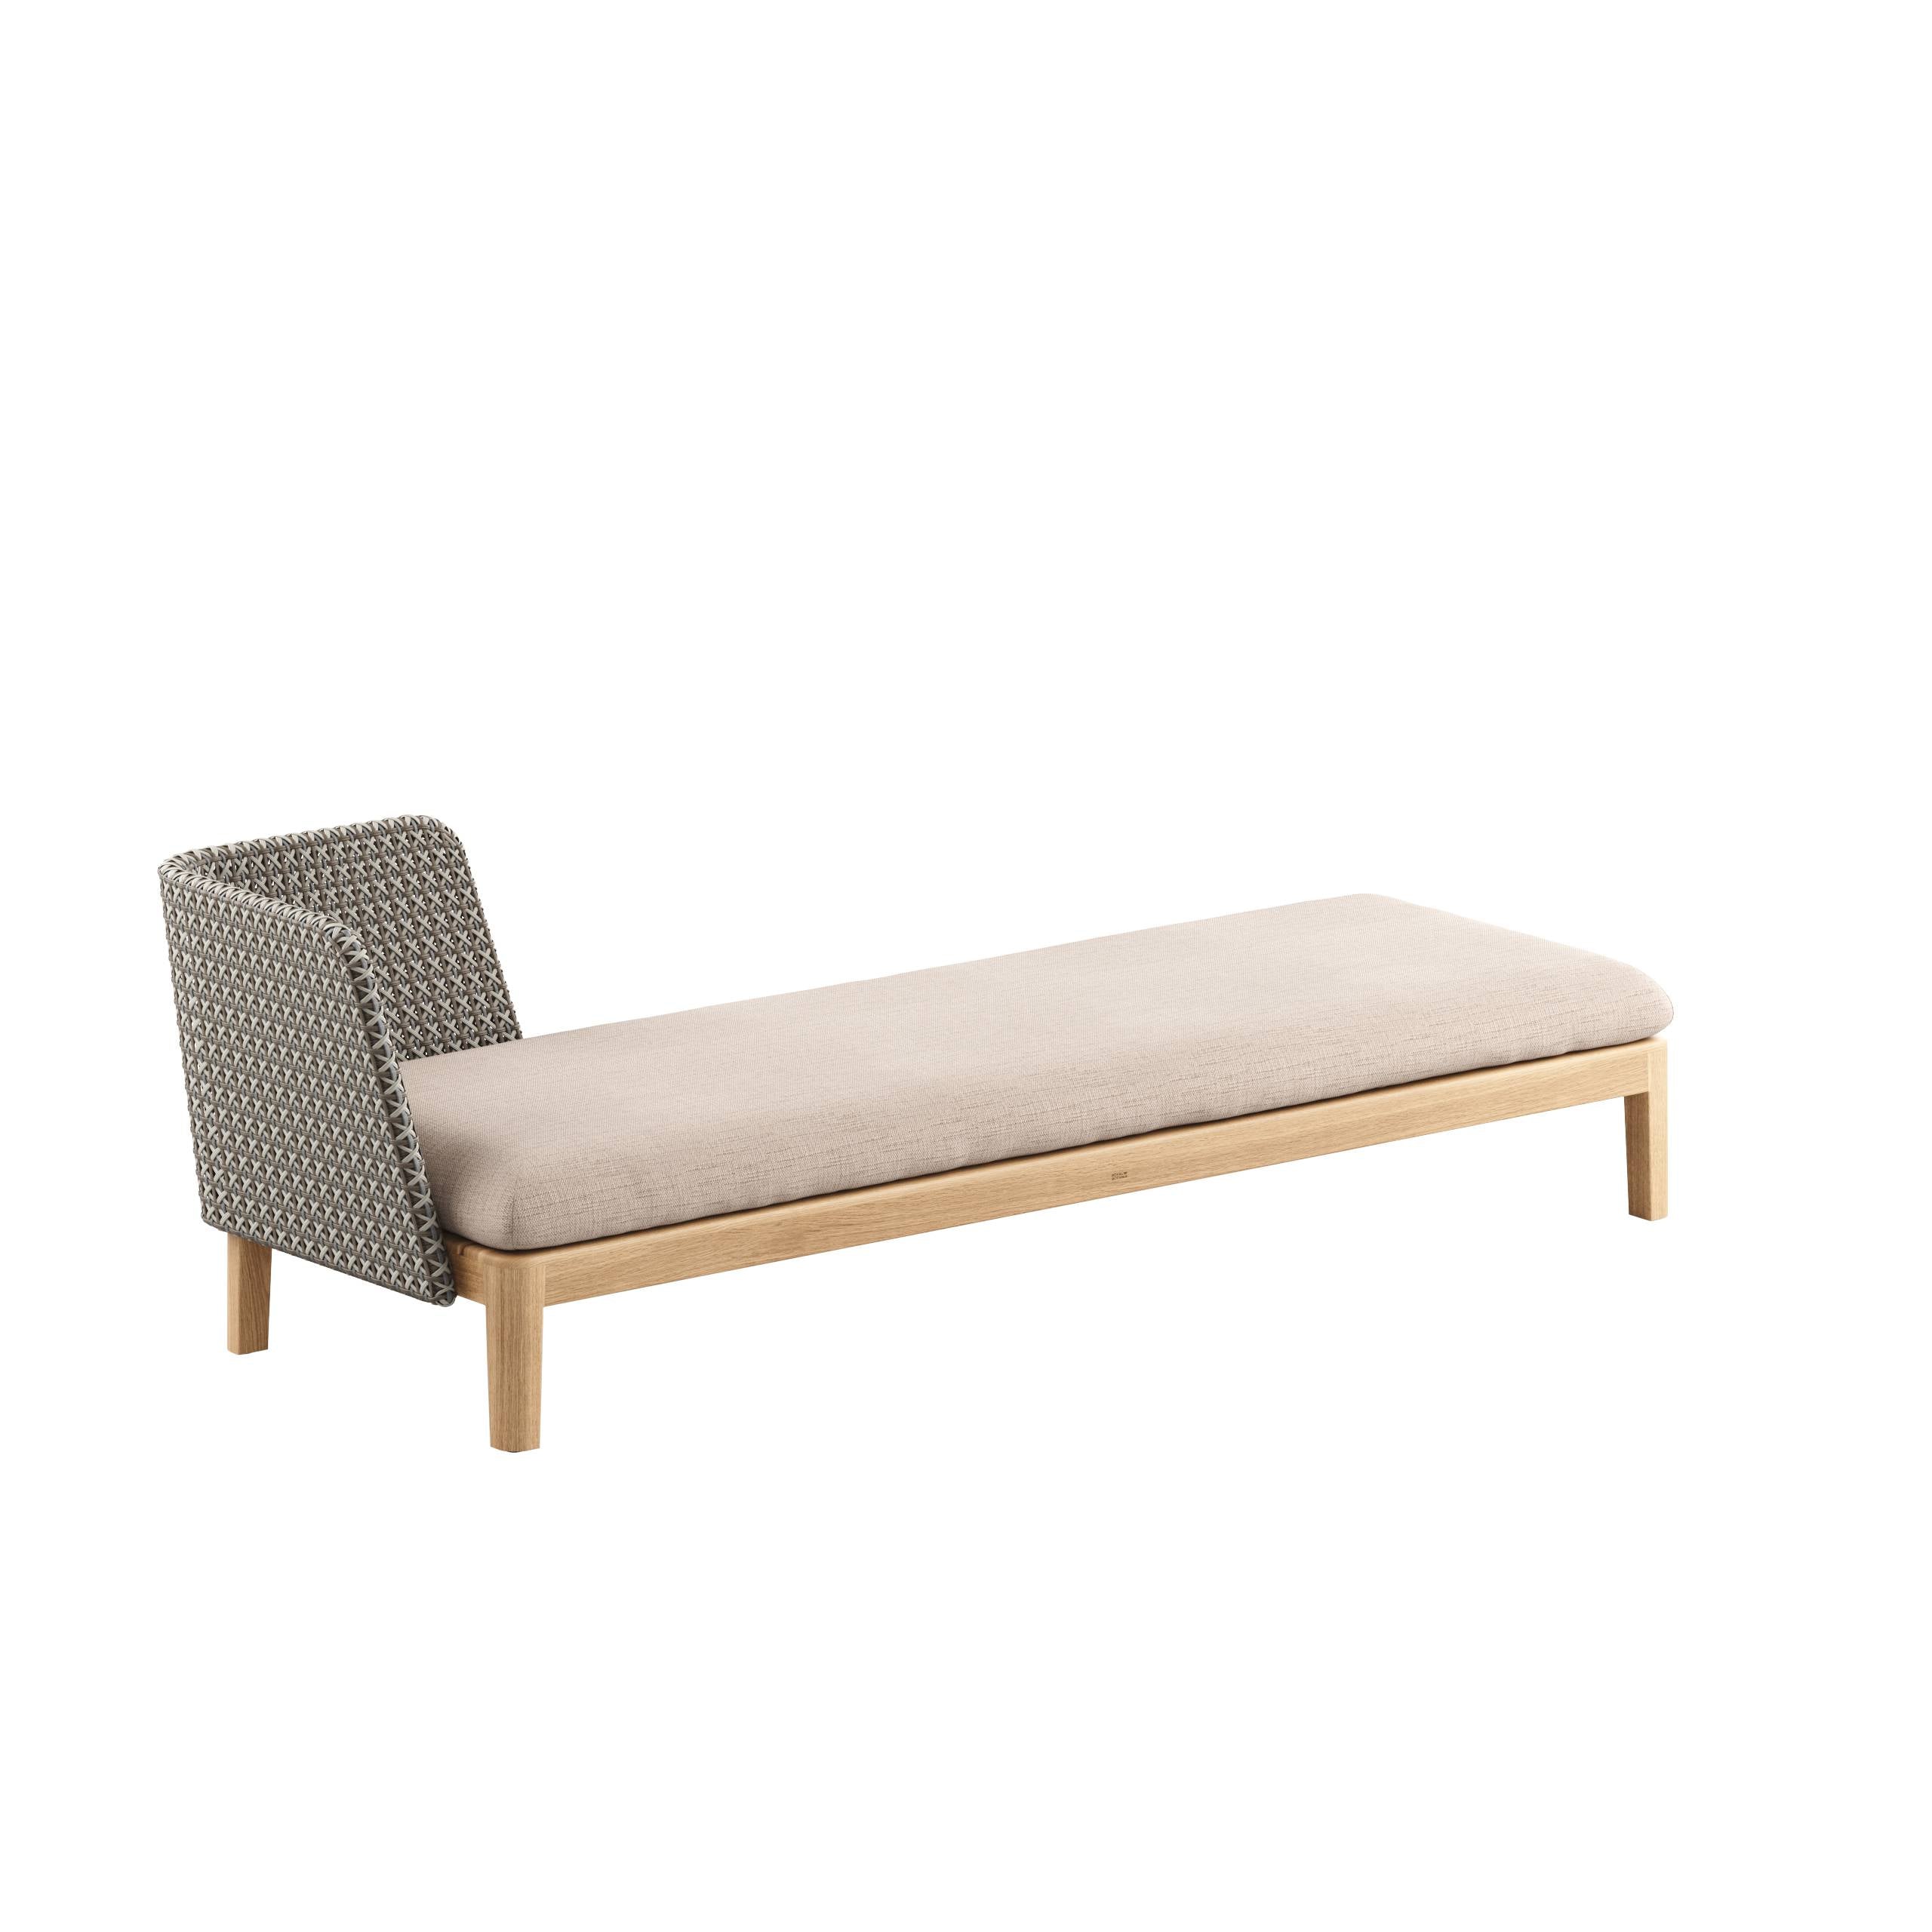 Calypso Lounge 210 With Woven Back And Right Armrest